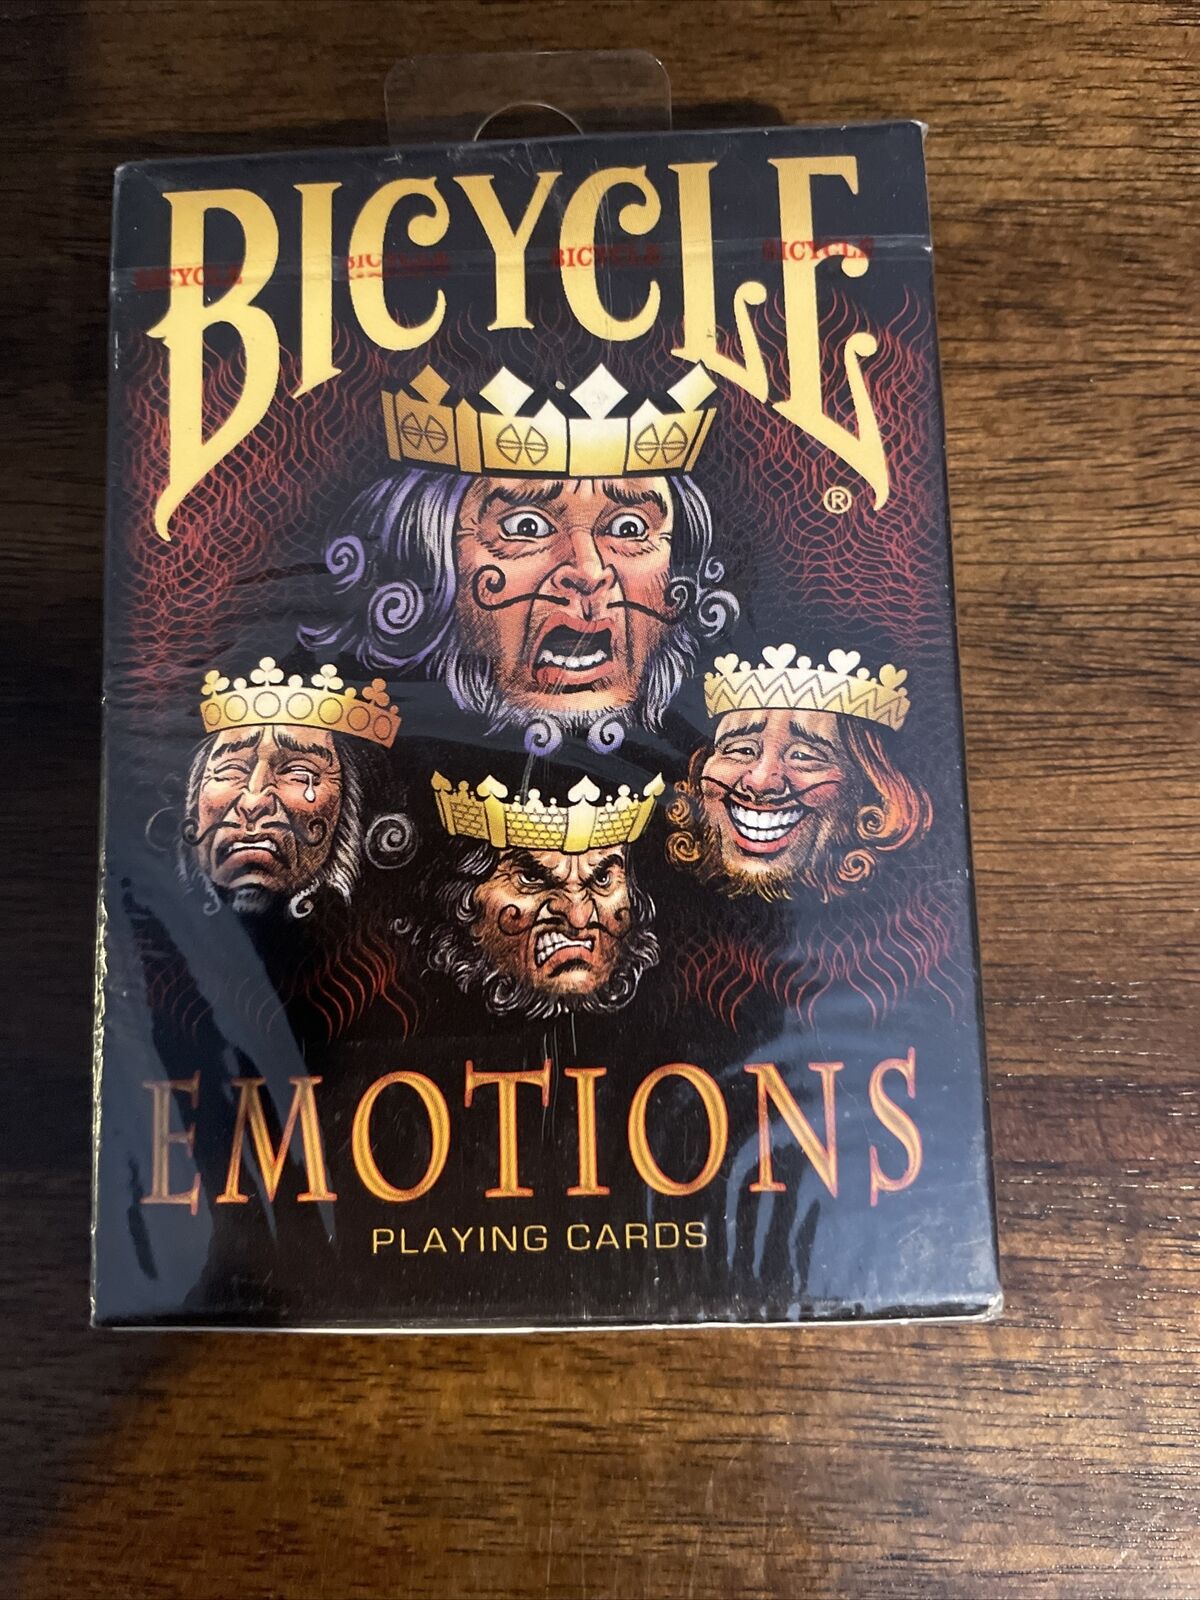 NIP BICYCLE EMOTIONS PLAYING CARDS POKER SIZE DECK LIMITED EDITION SEALED NEW